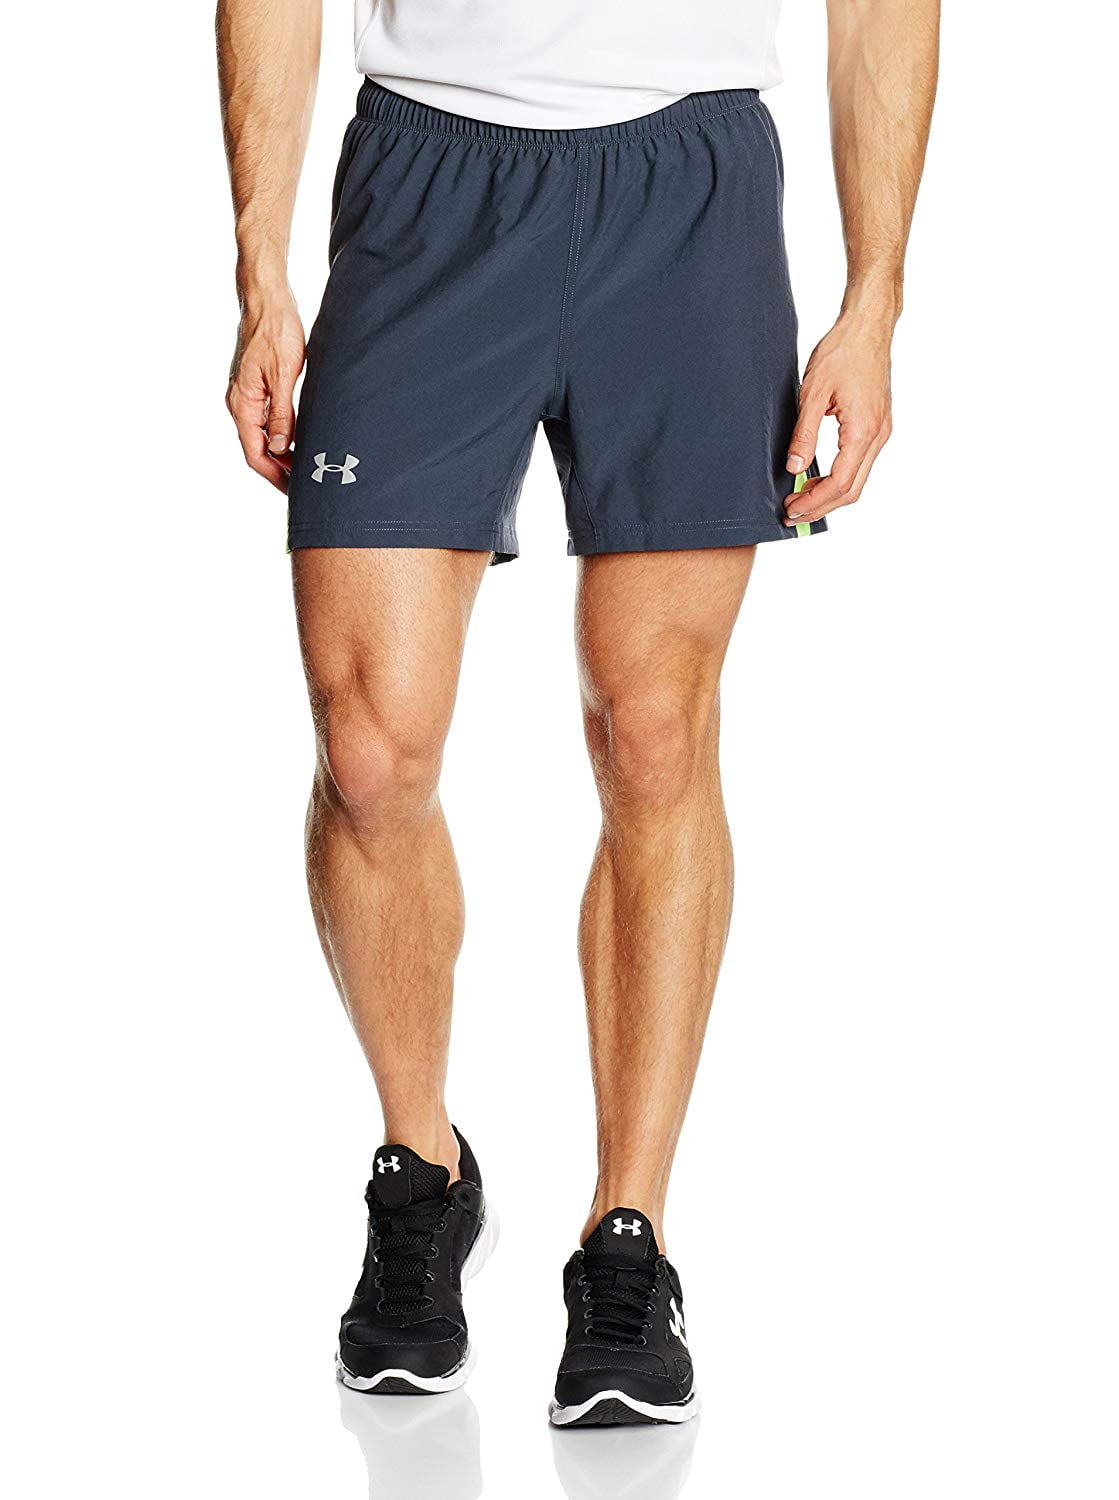 under armour running shorts with liner